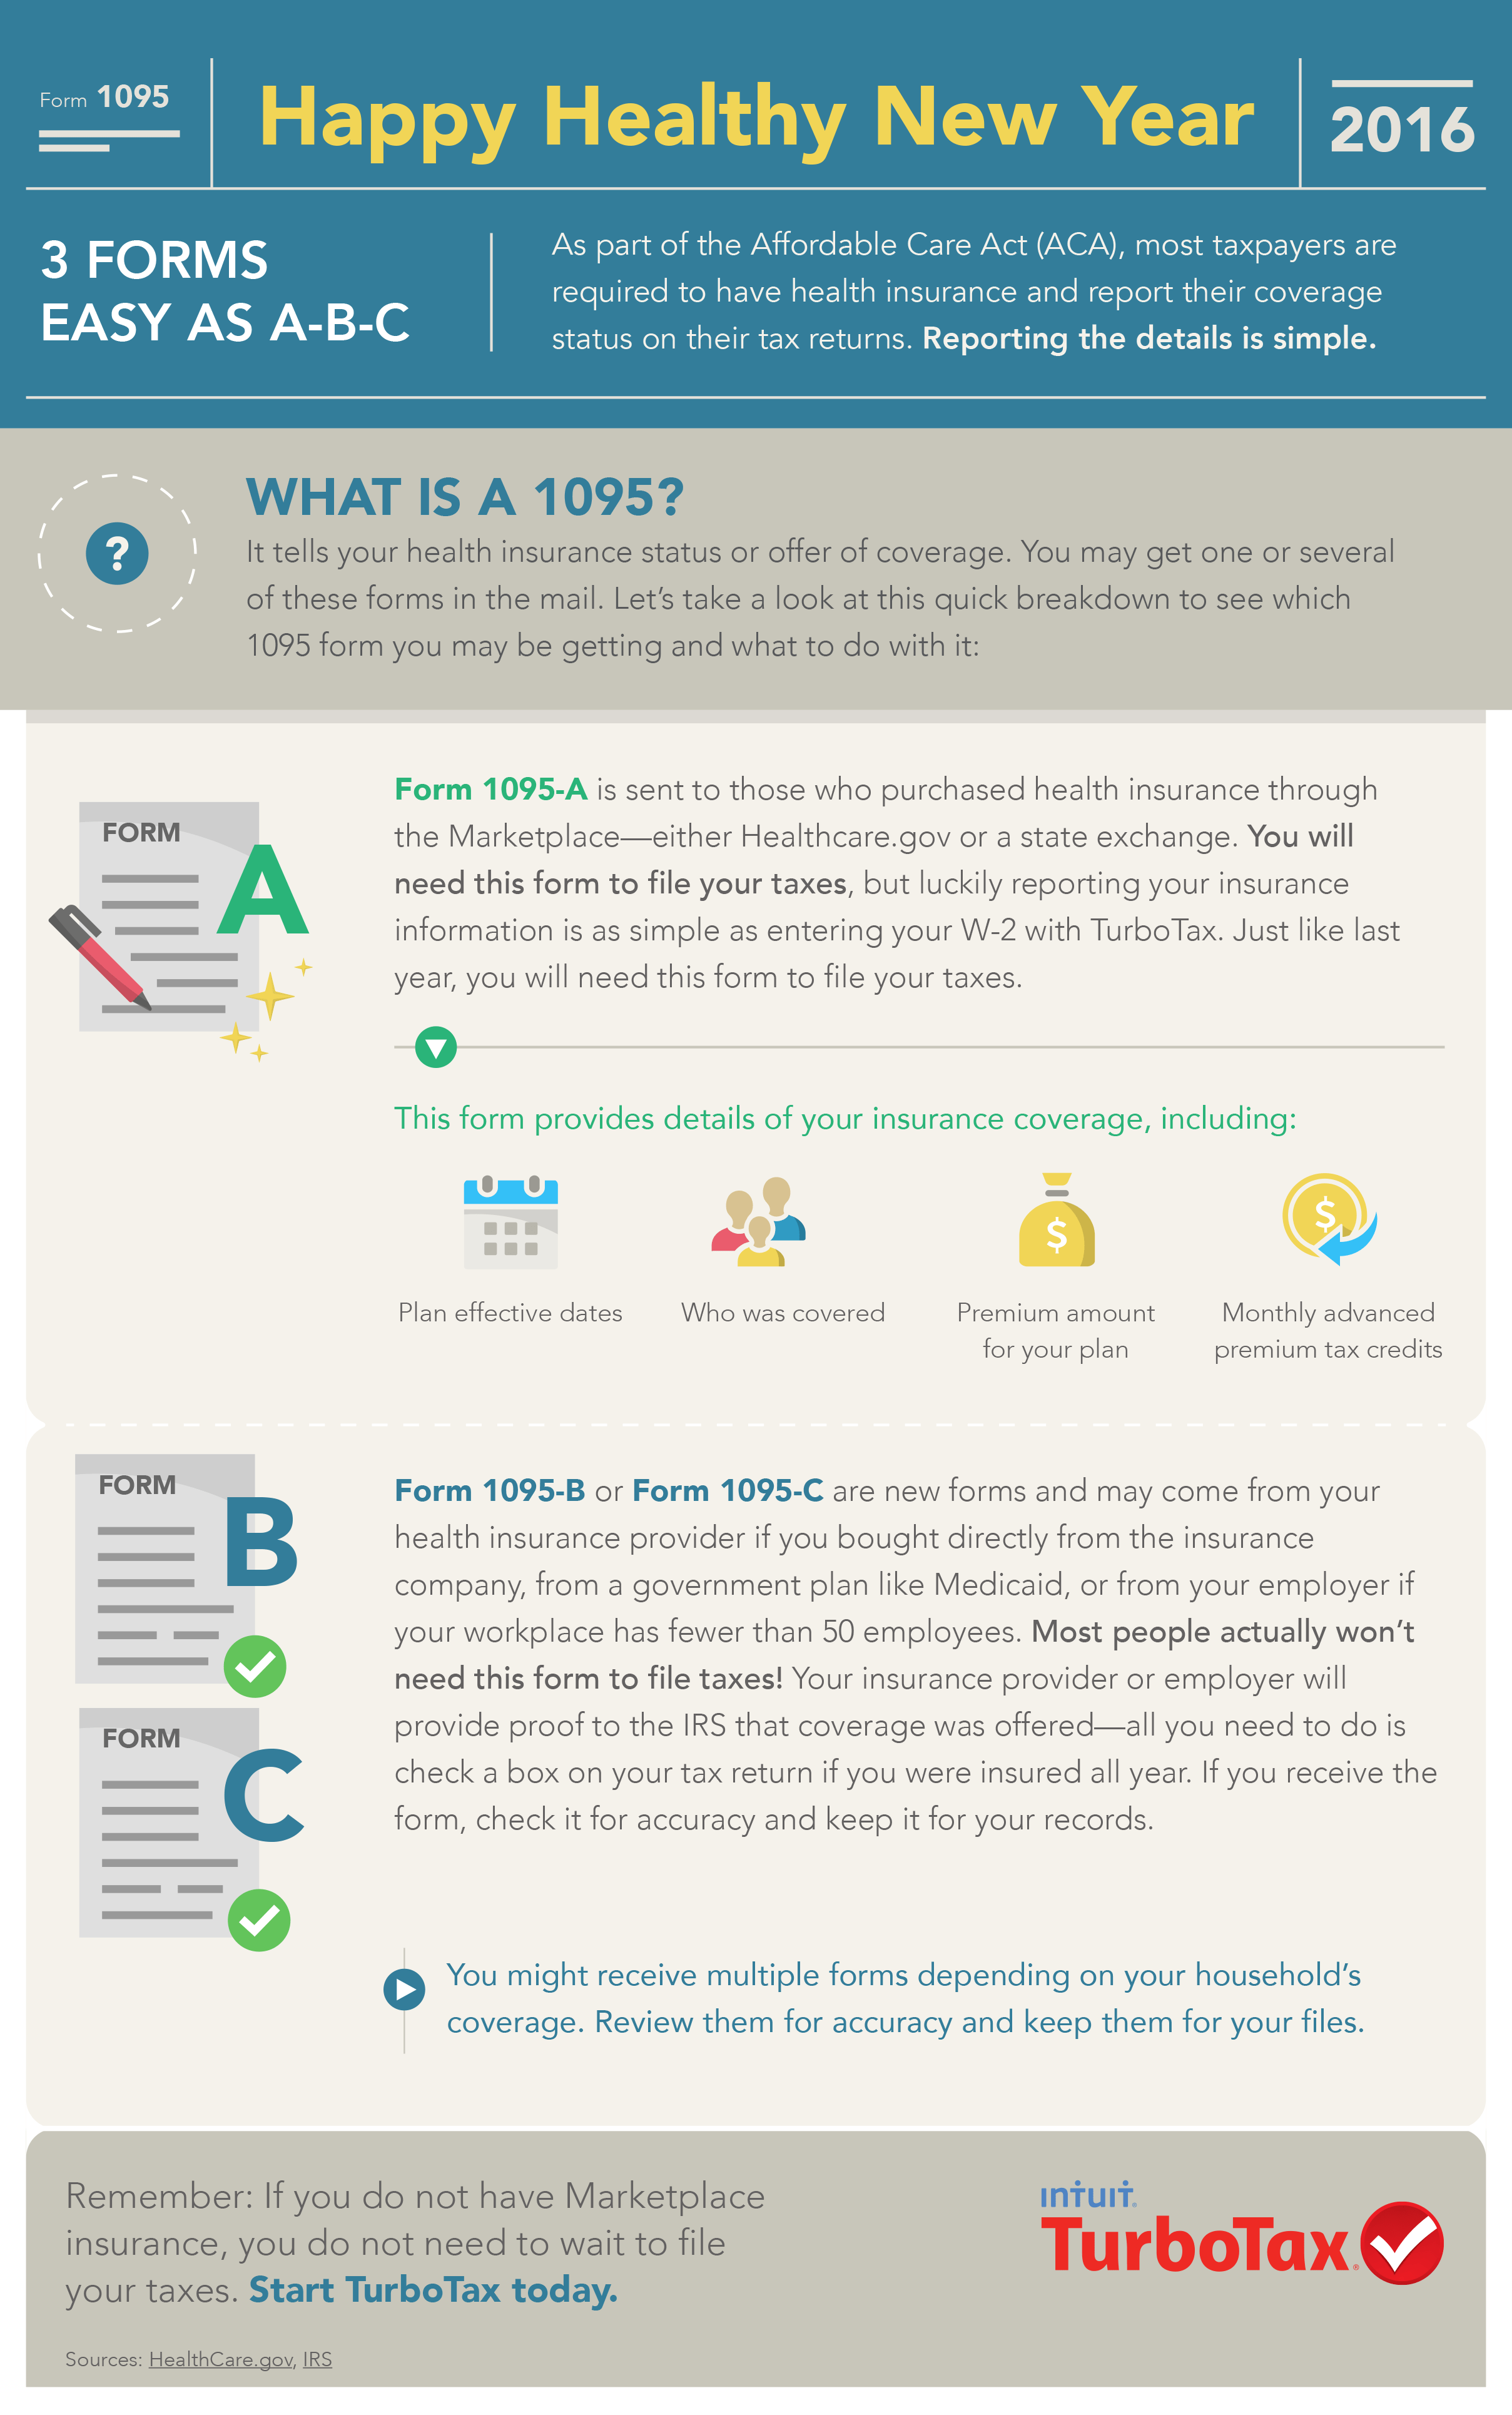 your-quick-easy-guide-to-1095-health-insurance-forms-infographic